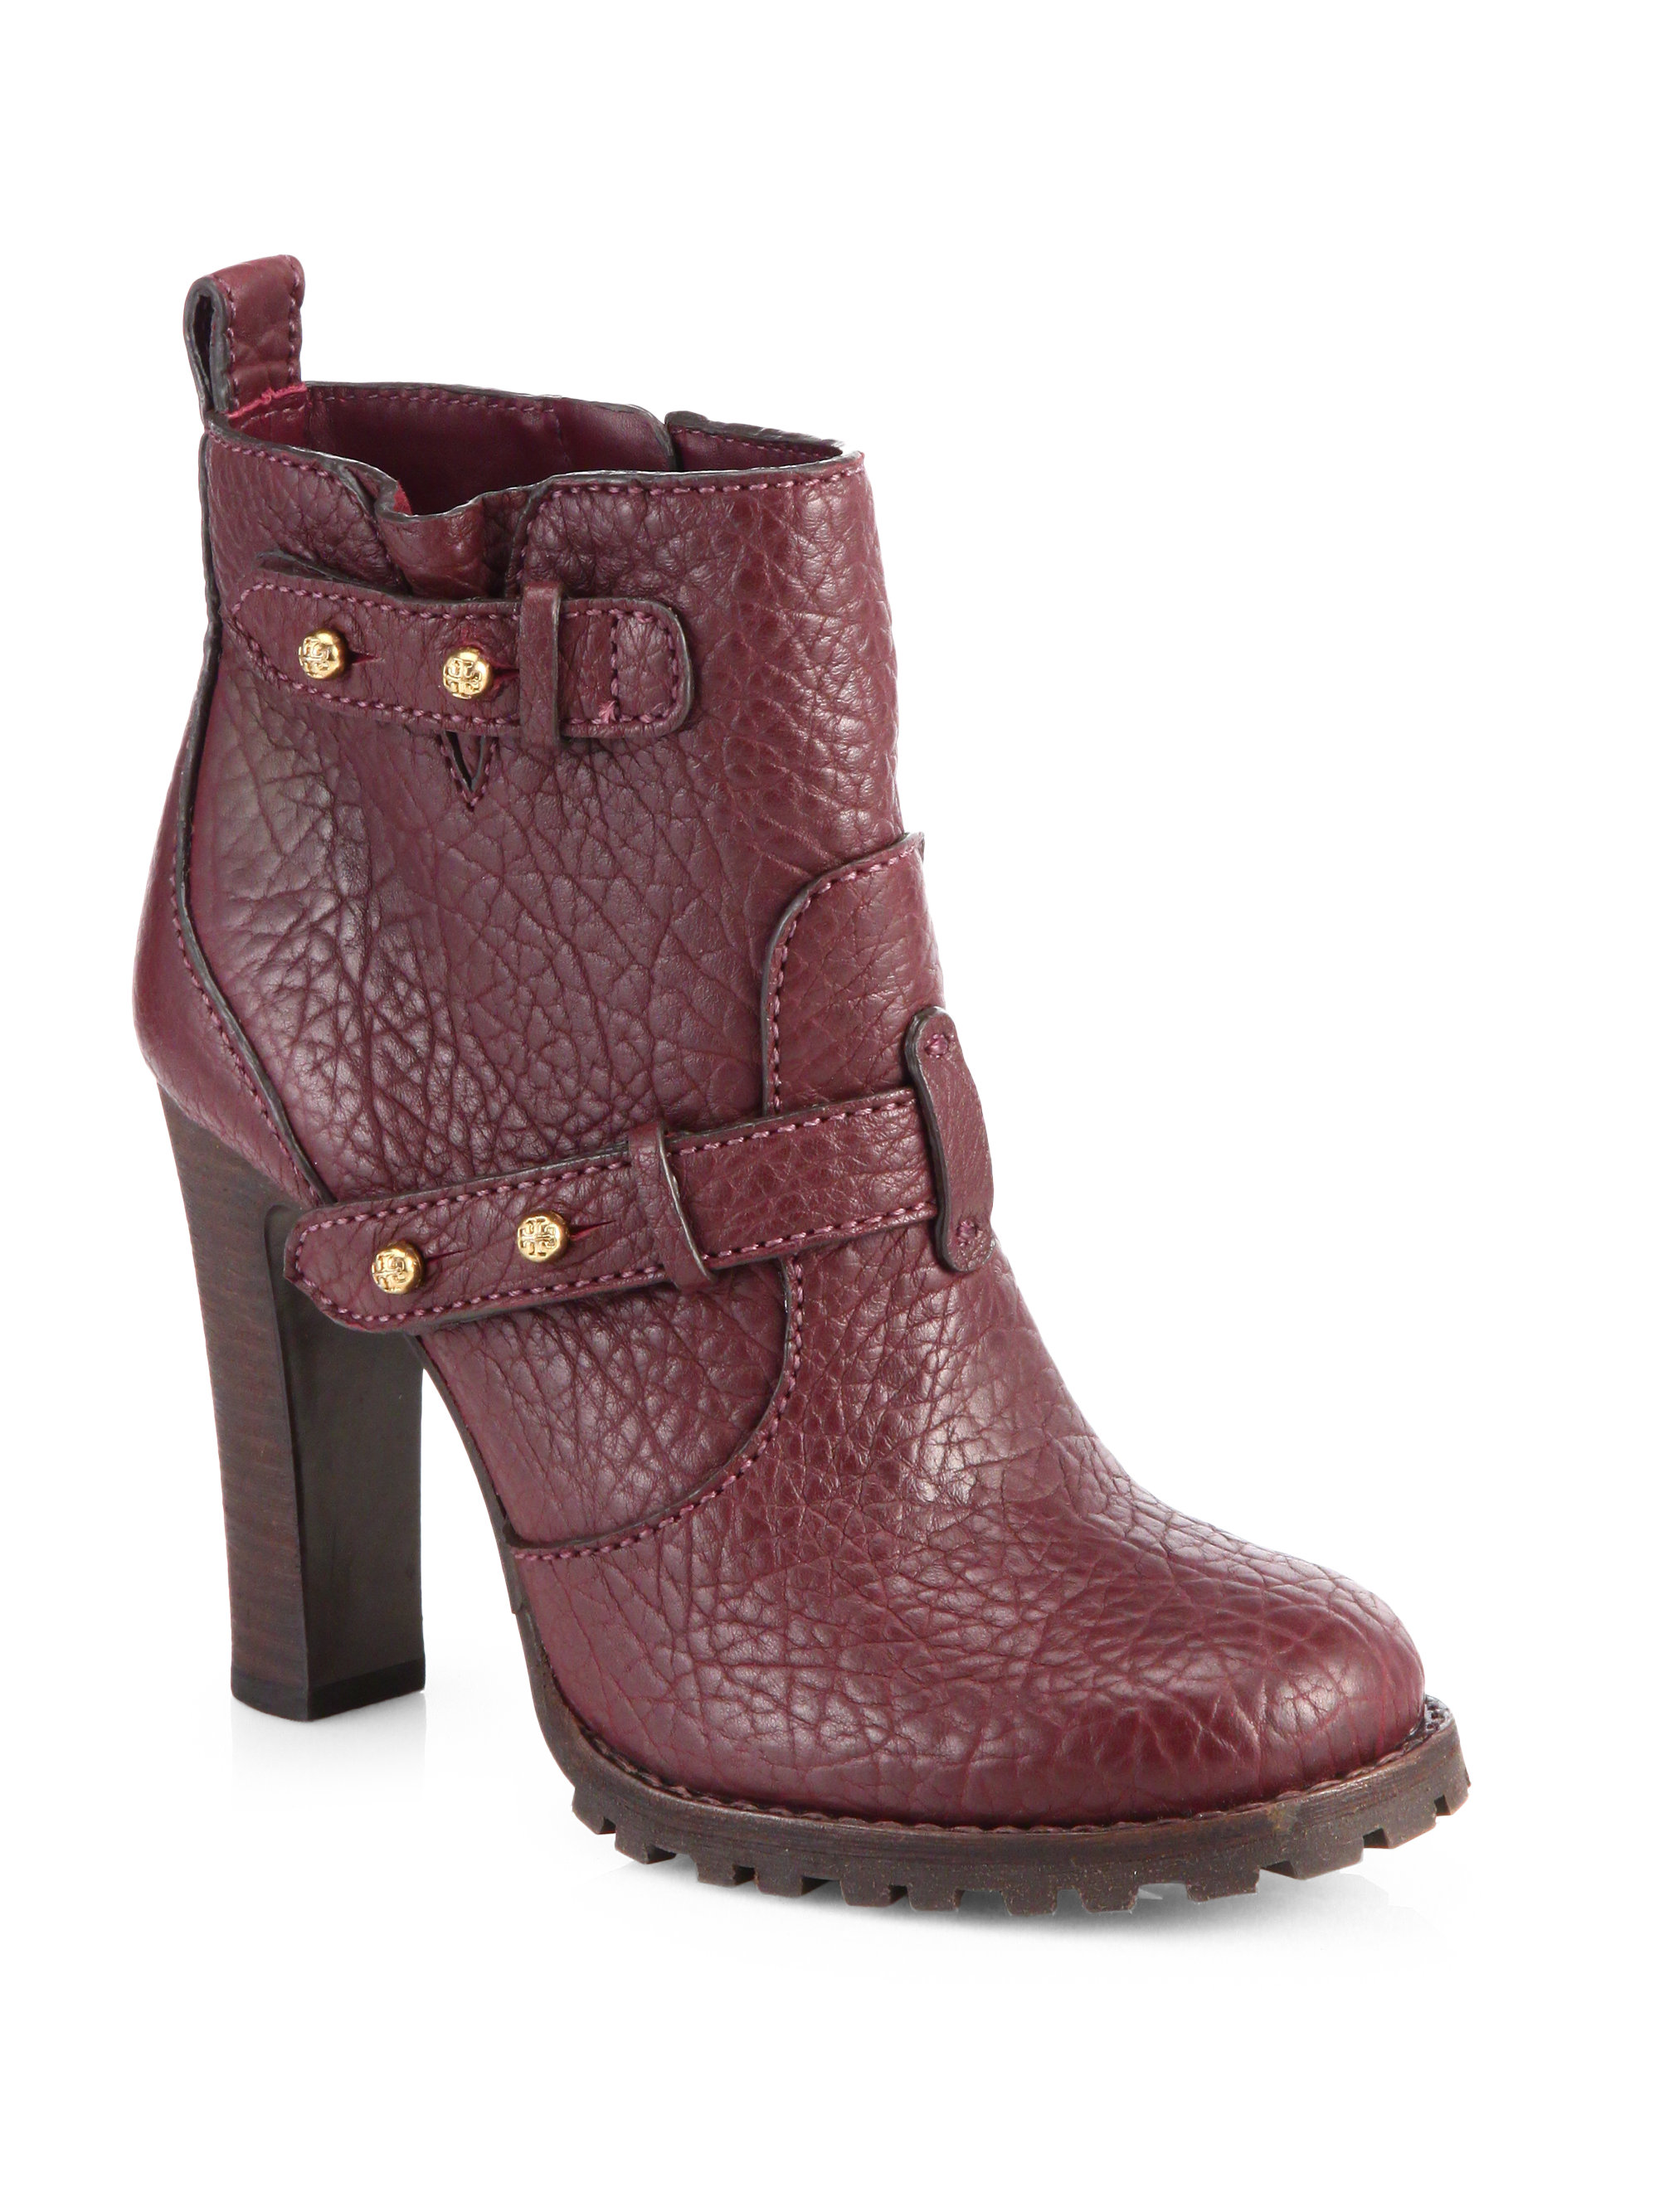 Tory Burch Landers Leather Platform Ankle Boots in Red (DARK PLUM) | Lyst